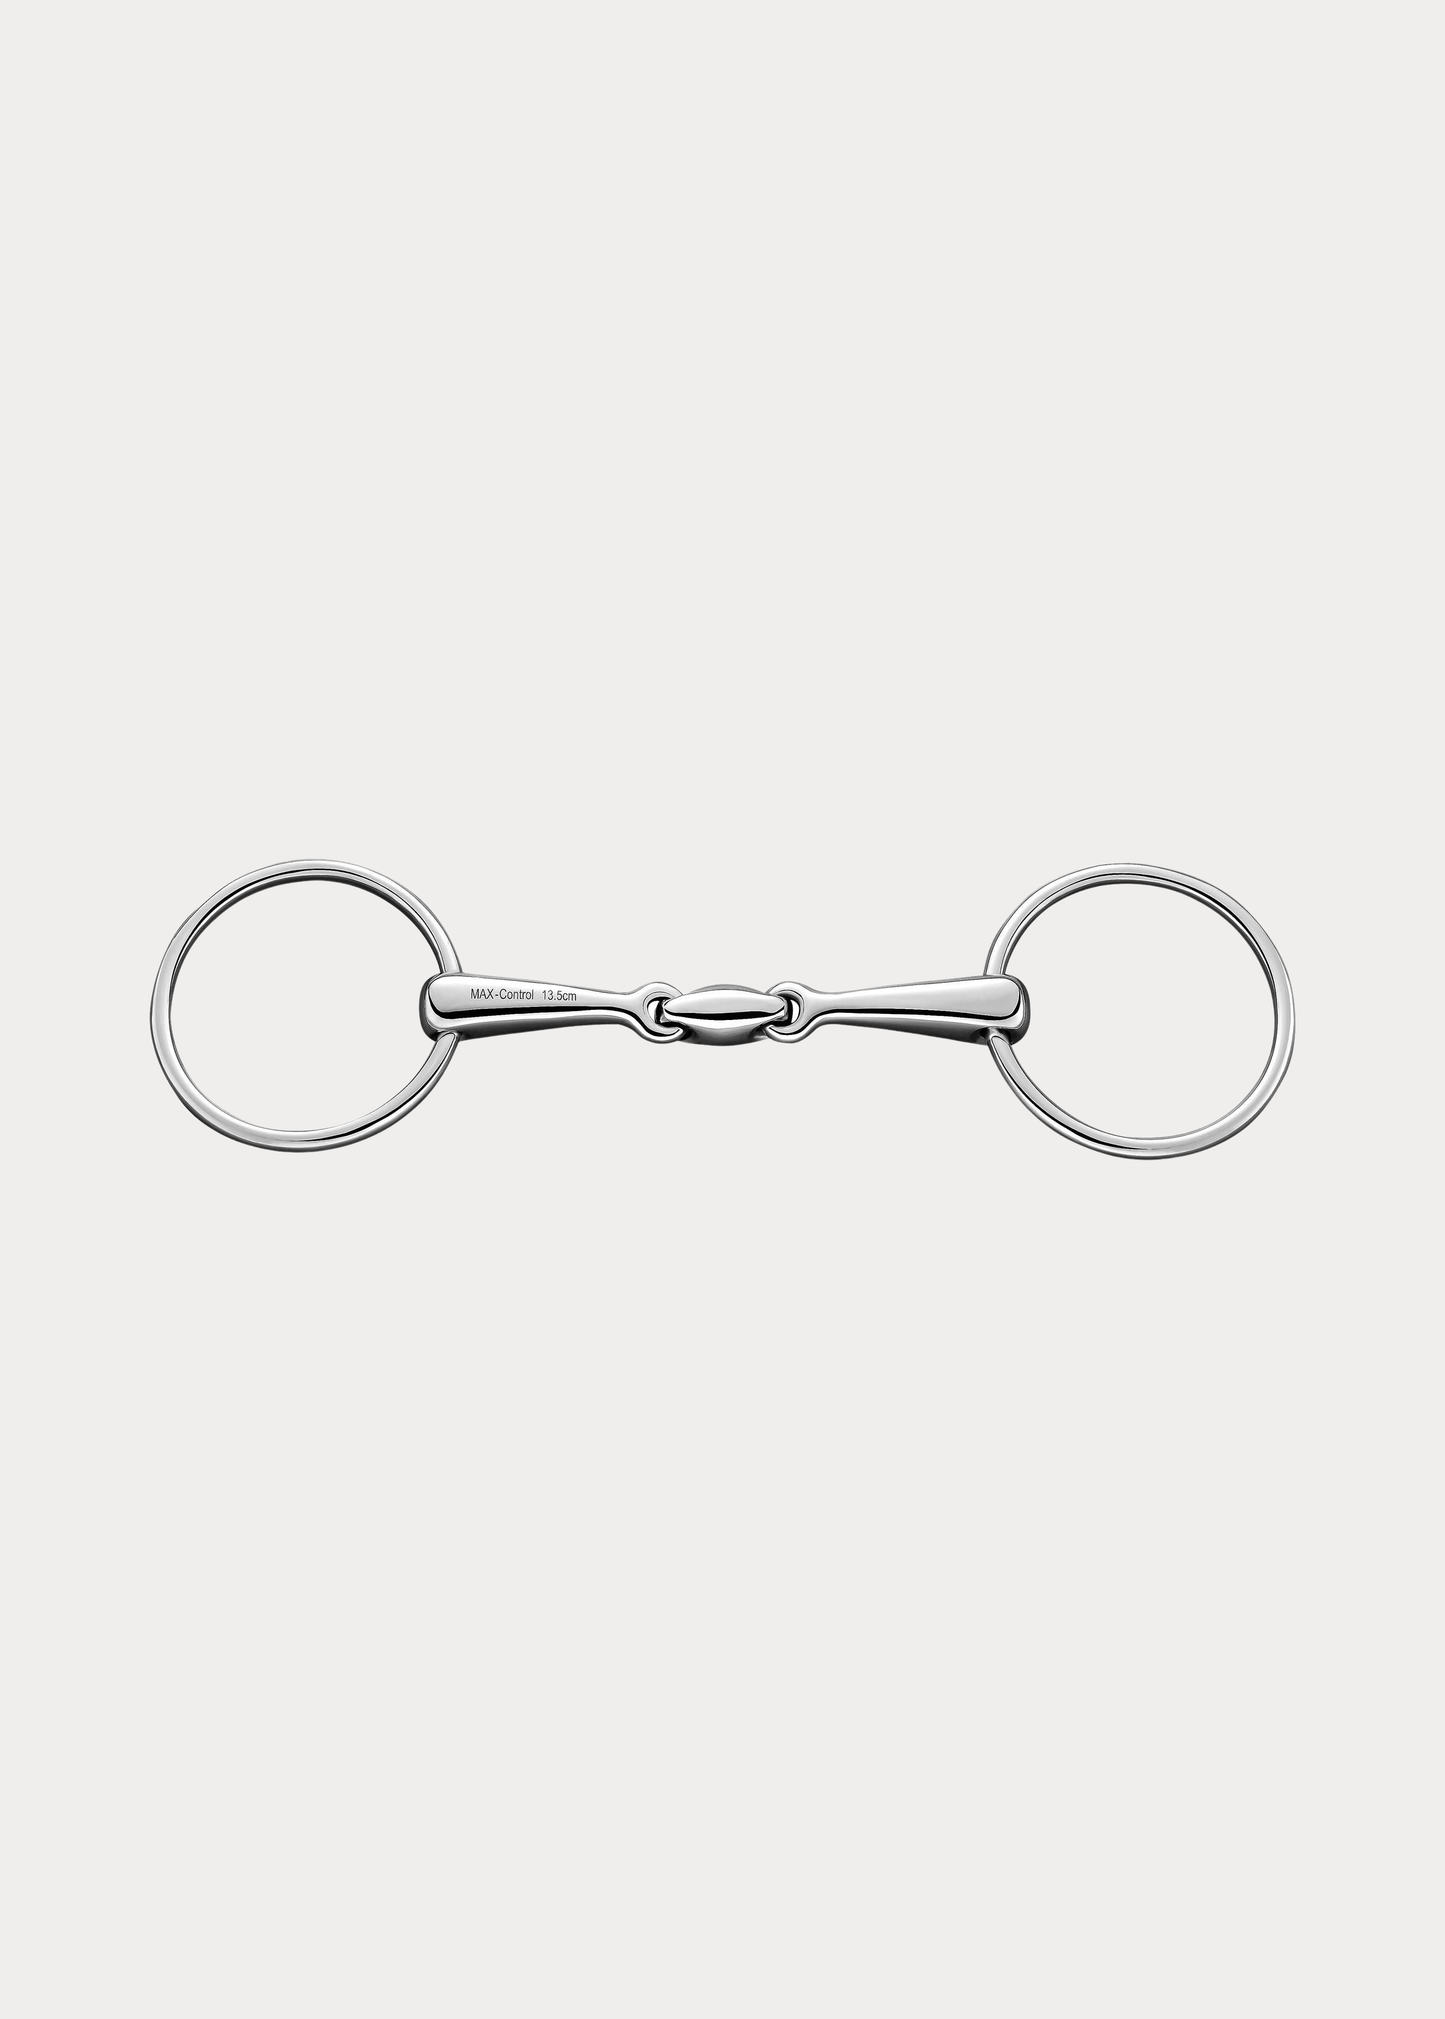 SPRENGER MAX CONTROL WITH LOCKING MECHANISM - LOOSE RING 16MM STAINLESS STEEL